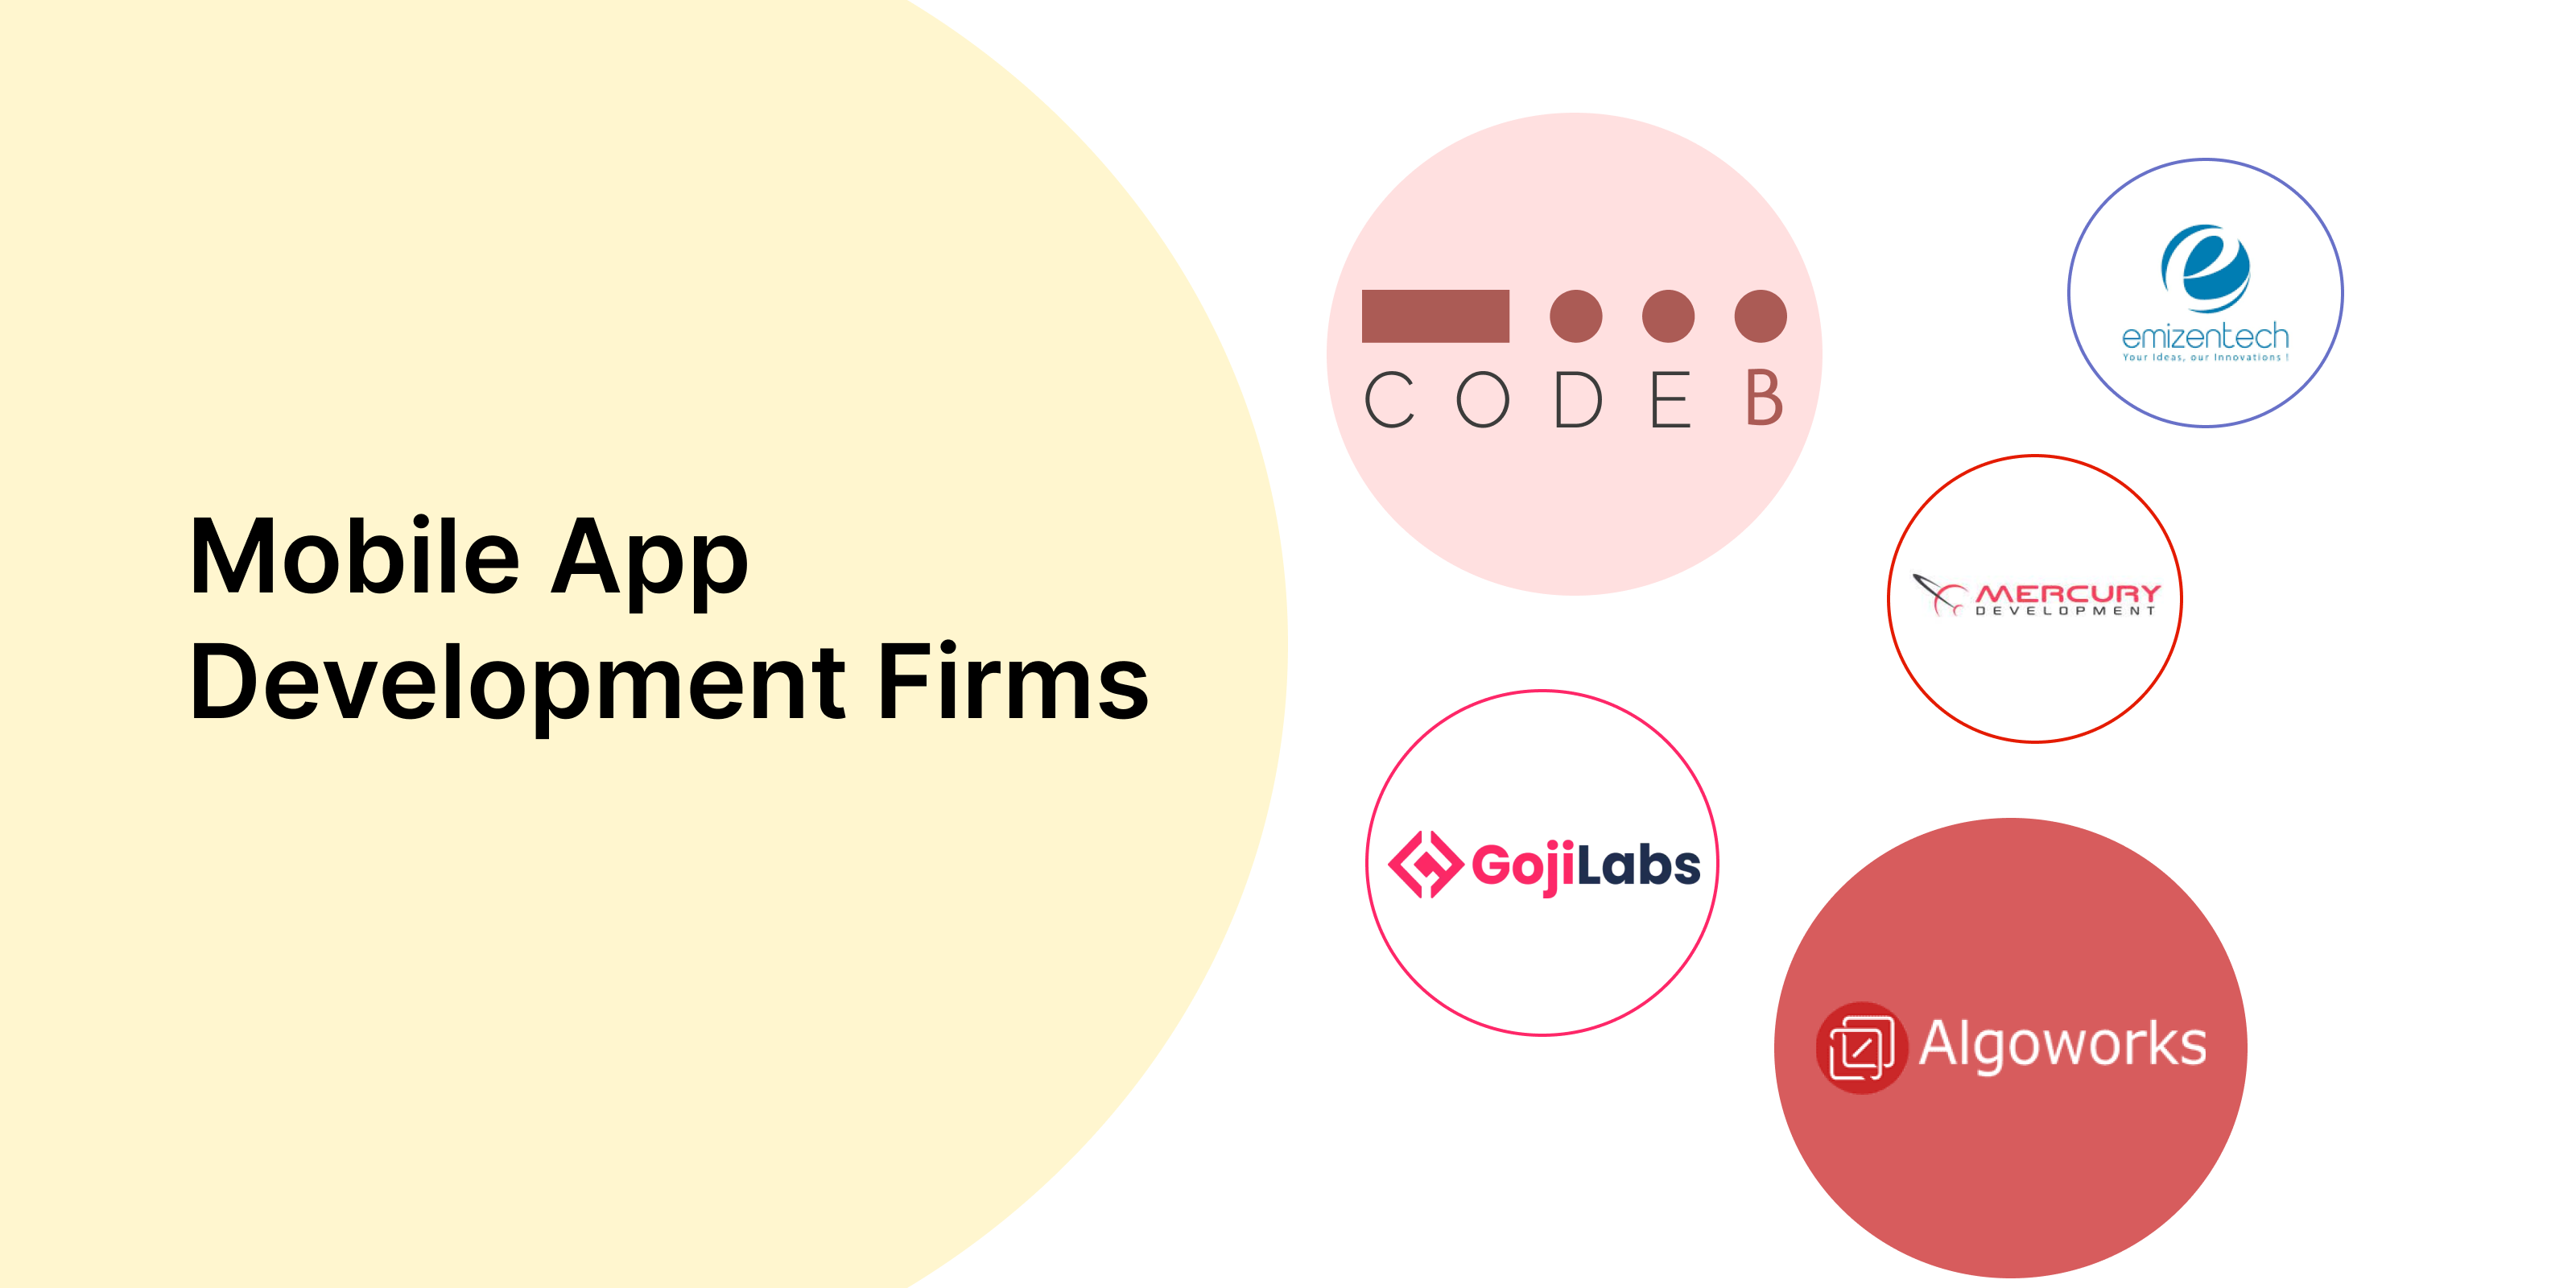 Logos of different app development agencies we have listed below